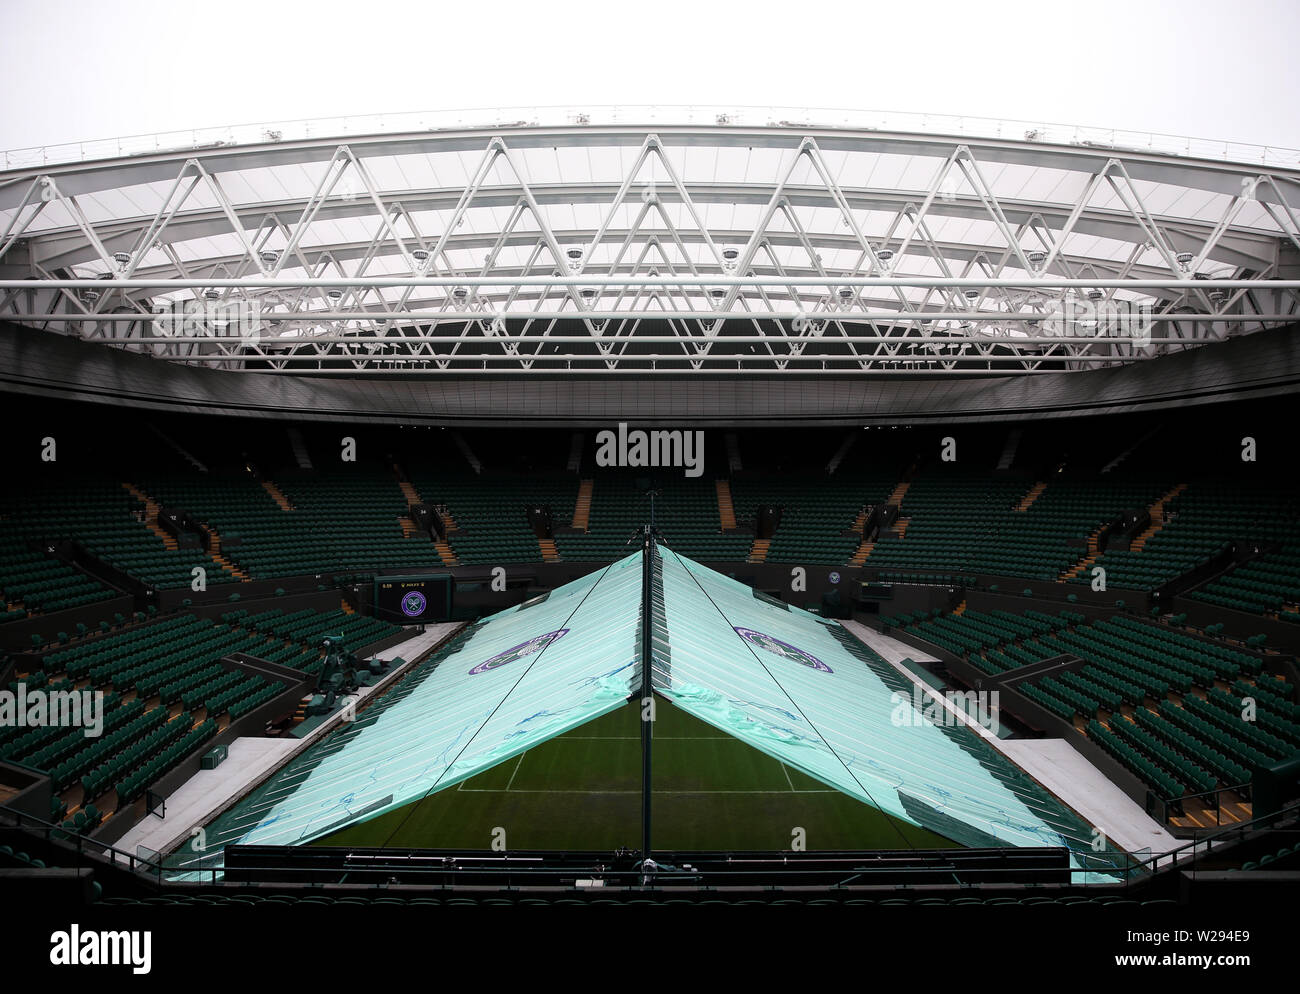 A view of the covers on Centre court on Middle Sunday Practice of the Wimbledon Championships at the All England Lawn tennis and Croquet Club, Wimbledon. Stock Photo